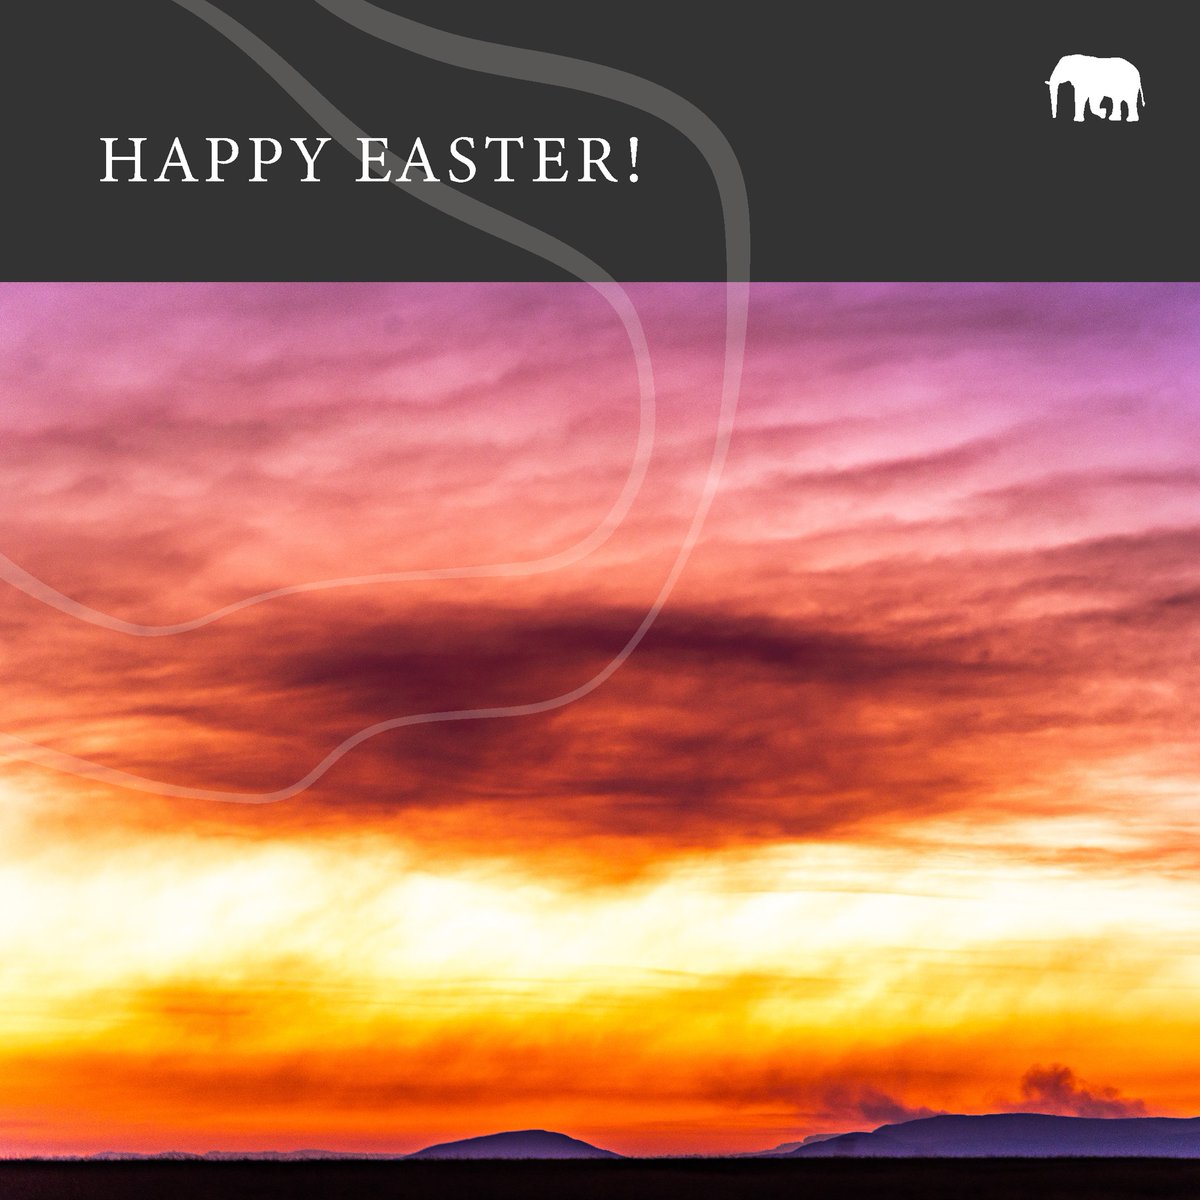 Wishing you a Happy Easter from all of us at Nambiti! May your day be filled with joy, peace, and special moments with your loved ones.